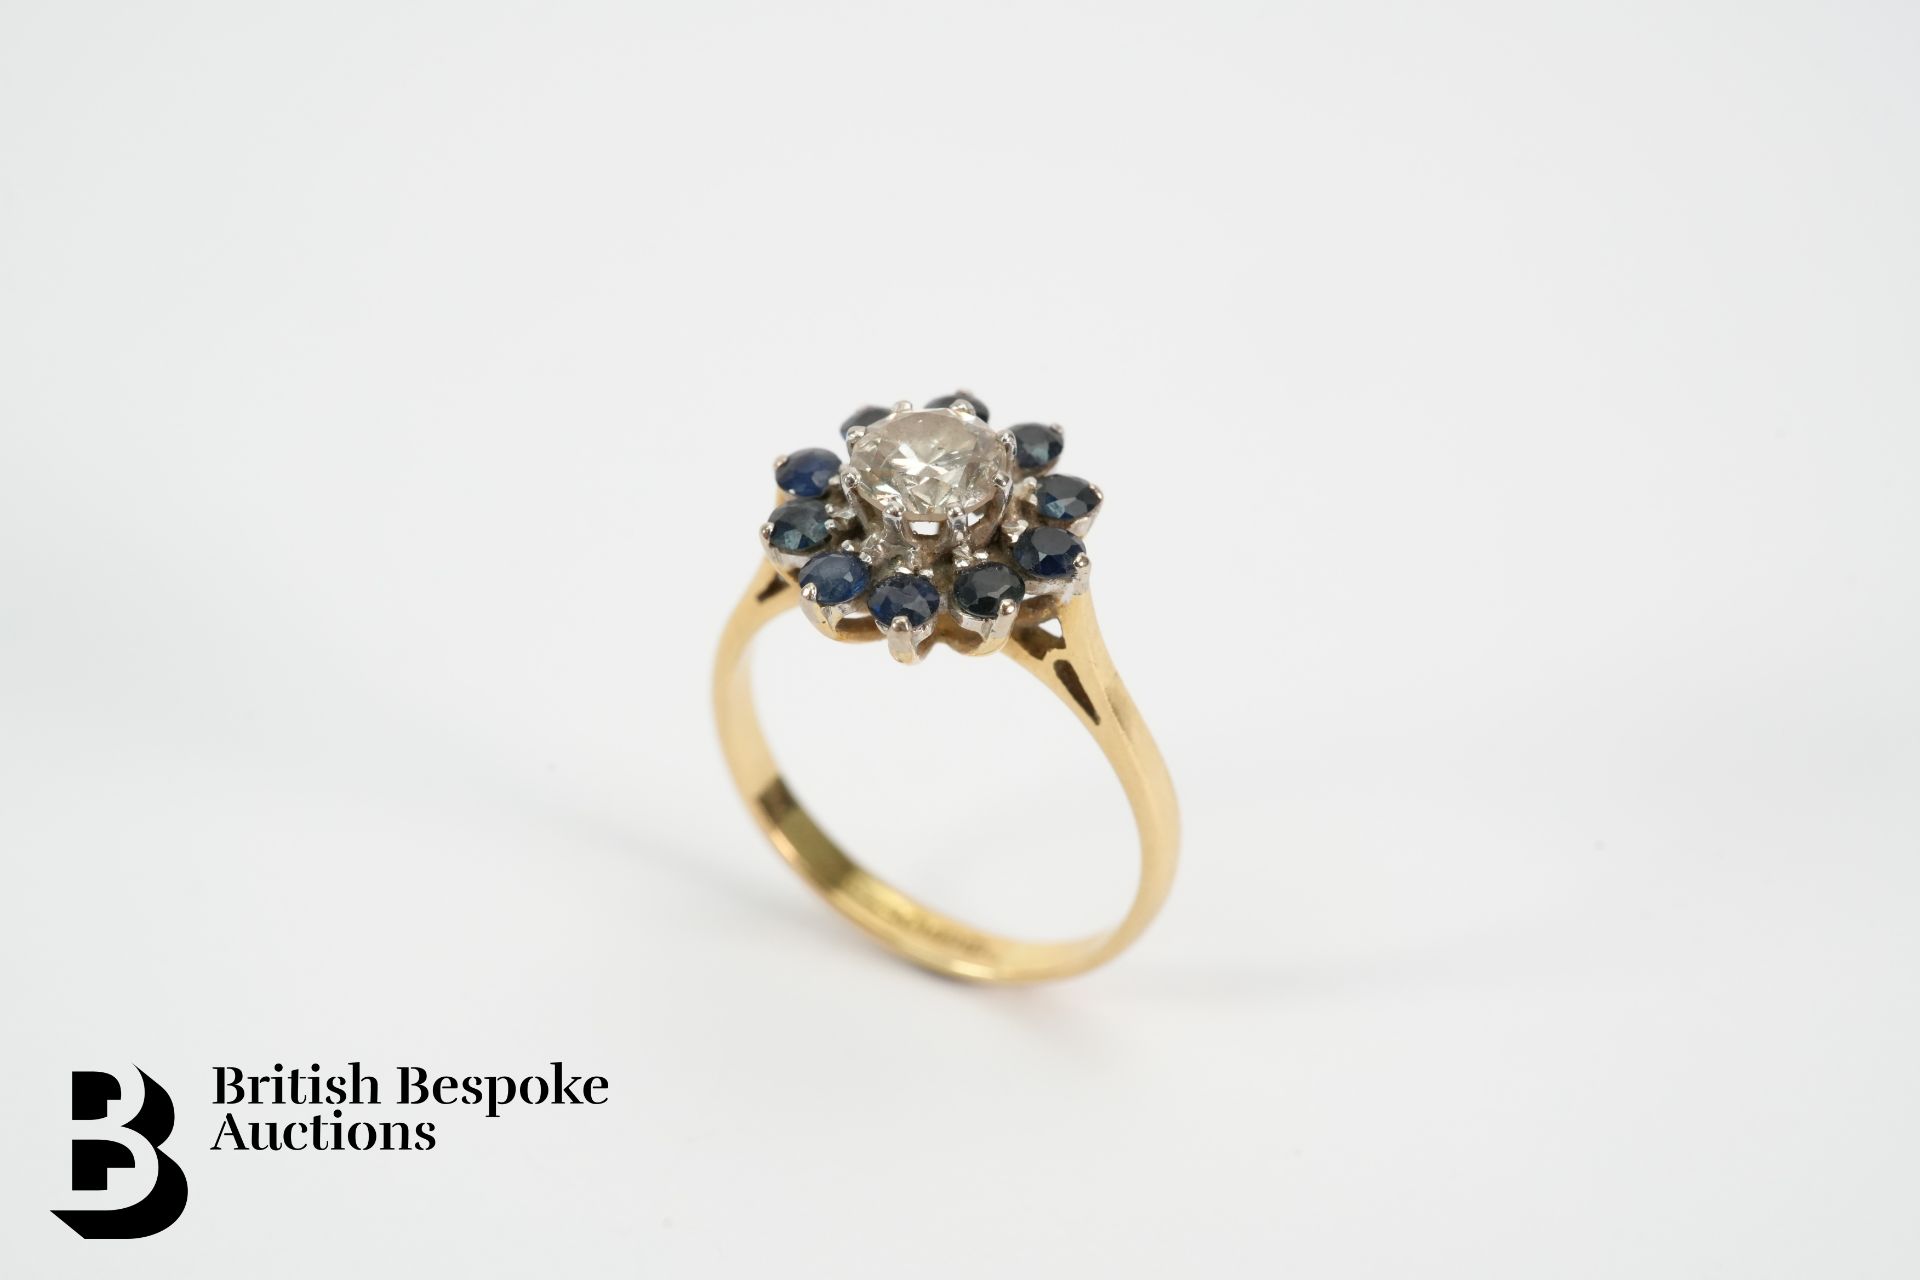 18ct Yellow Gold Diamond and Sapphire Ring - Image 2 of 3